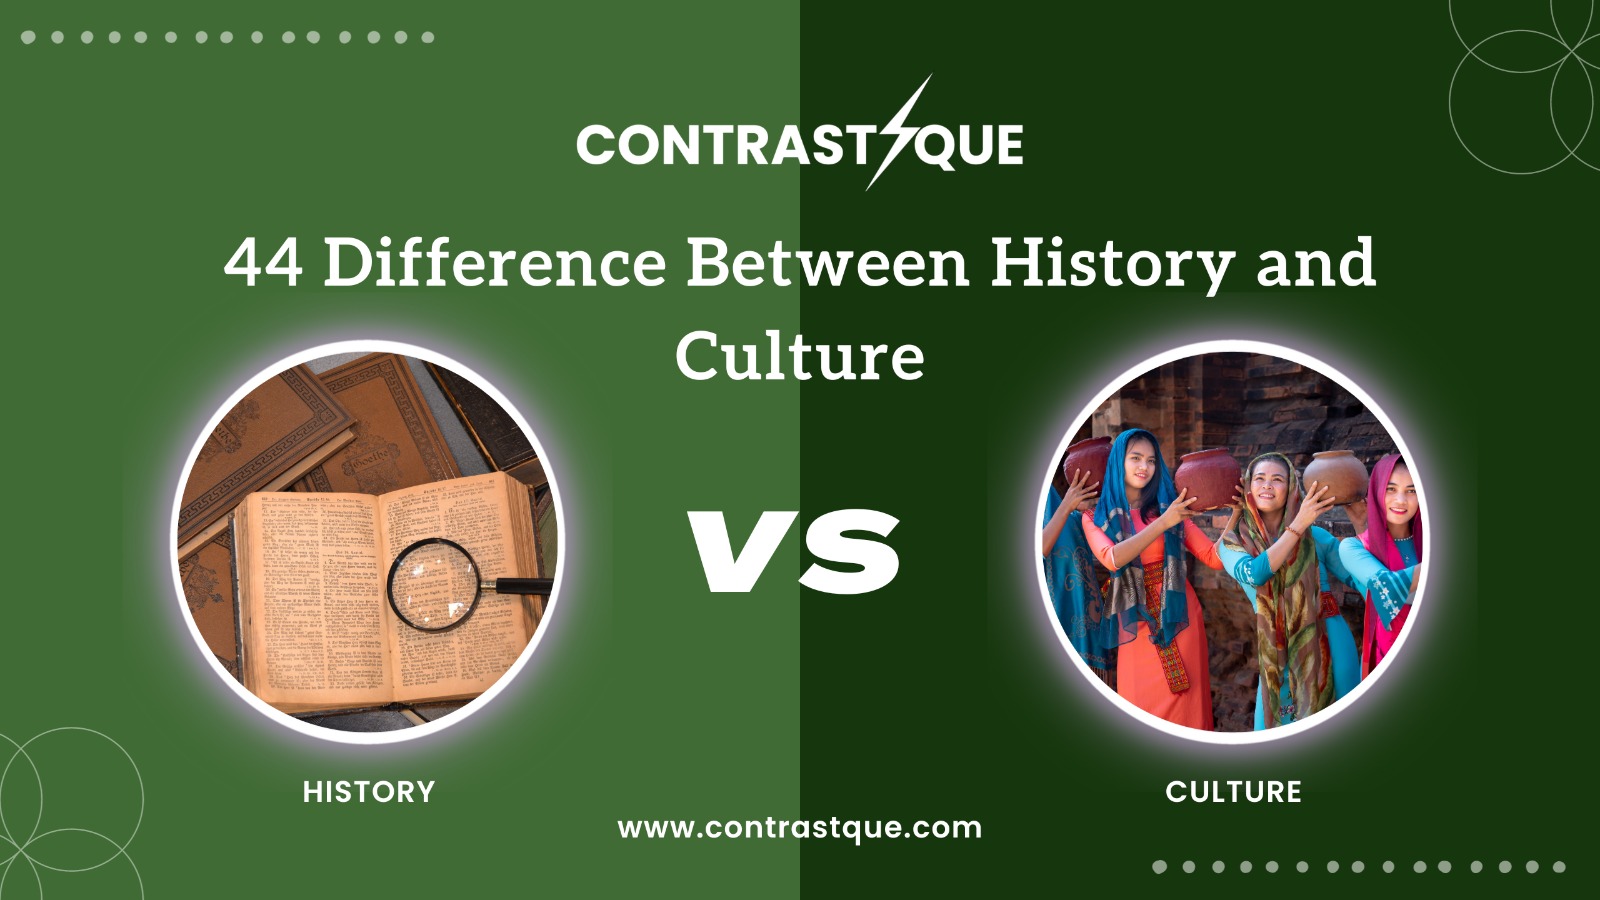 44 Difference Between History and Culture